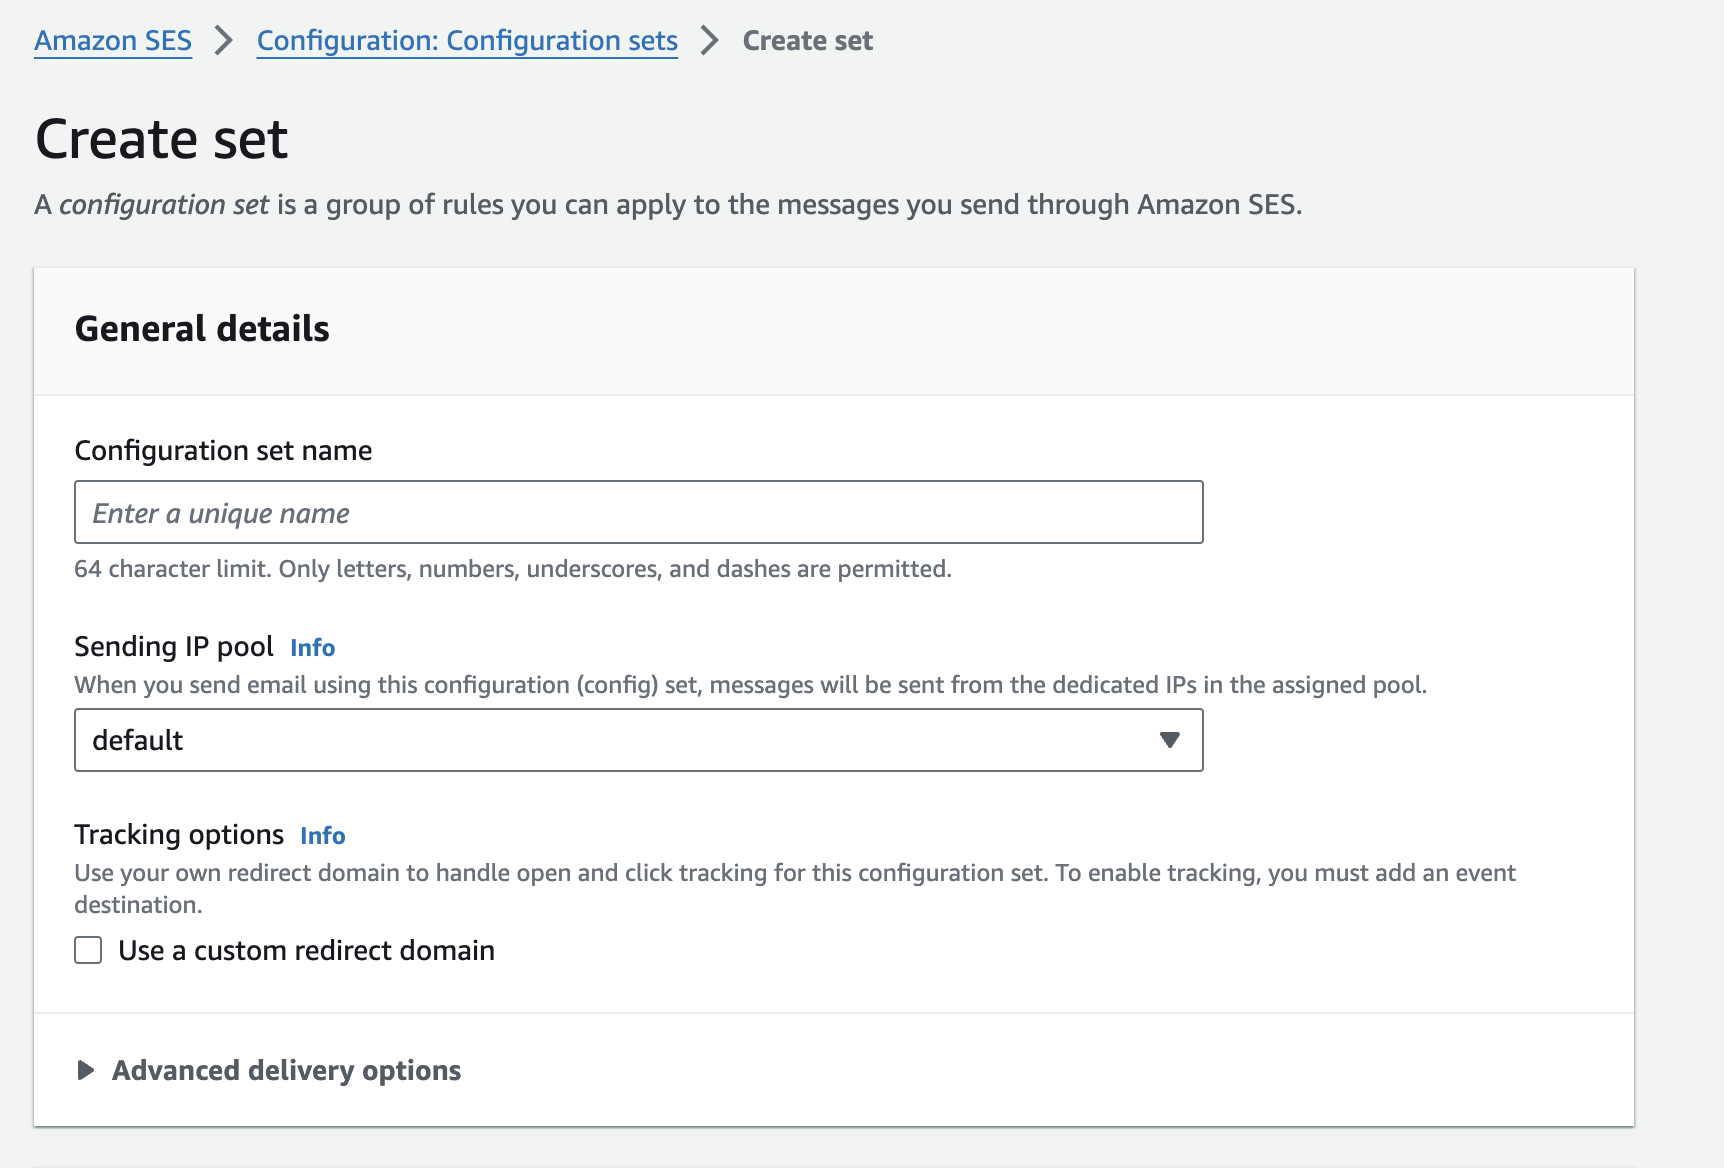 AWS Console view of creating a configuration set